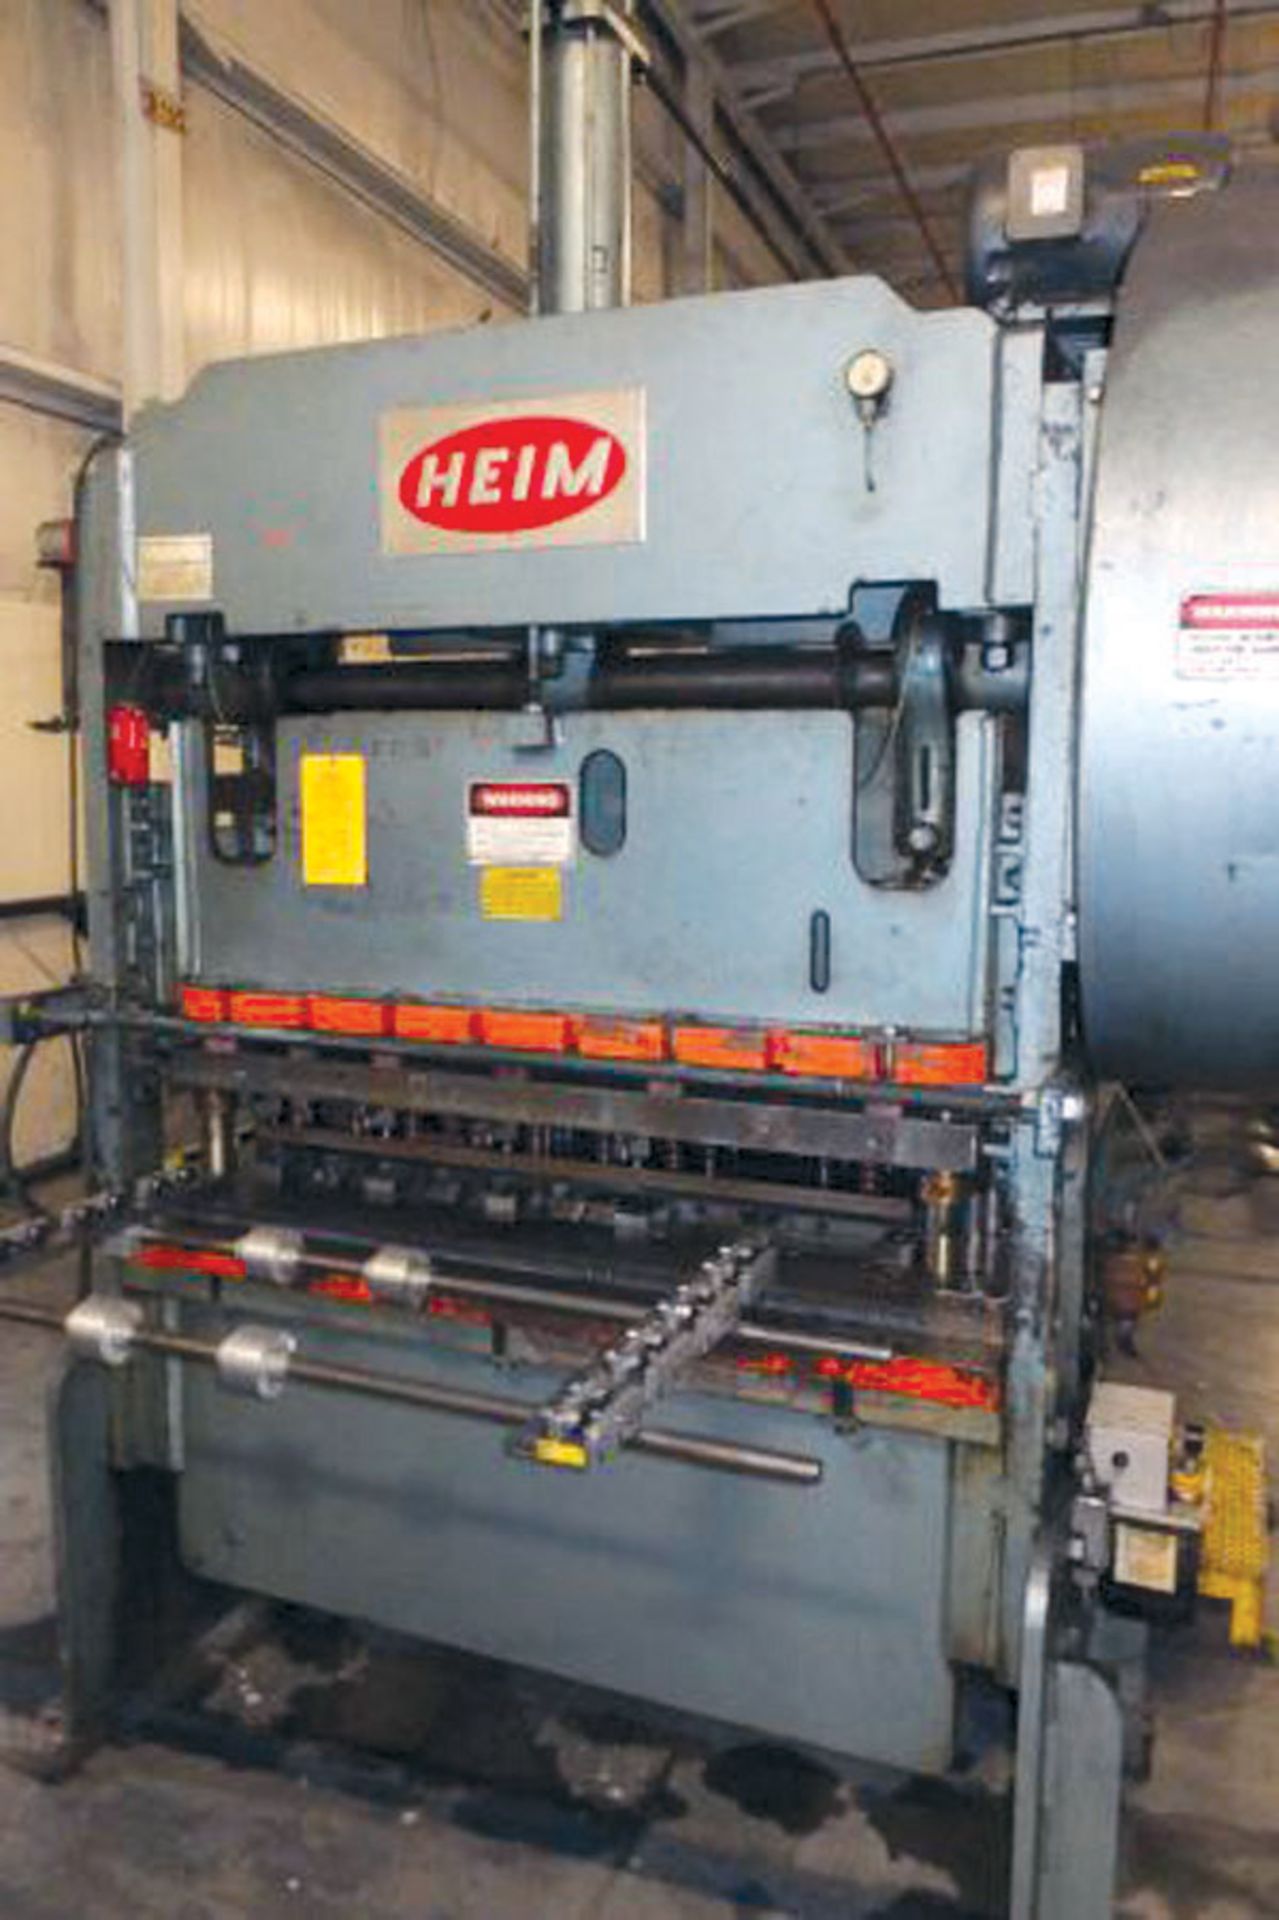 Upcoming Auctions - (2) Metalworking, Fabrication, Machining & Plant Support Equipment Auctions - Bild 14 aus 16